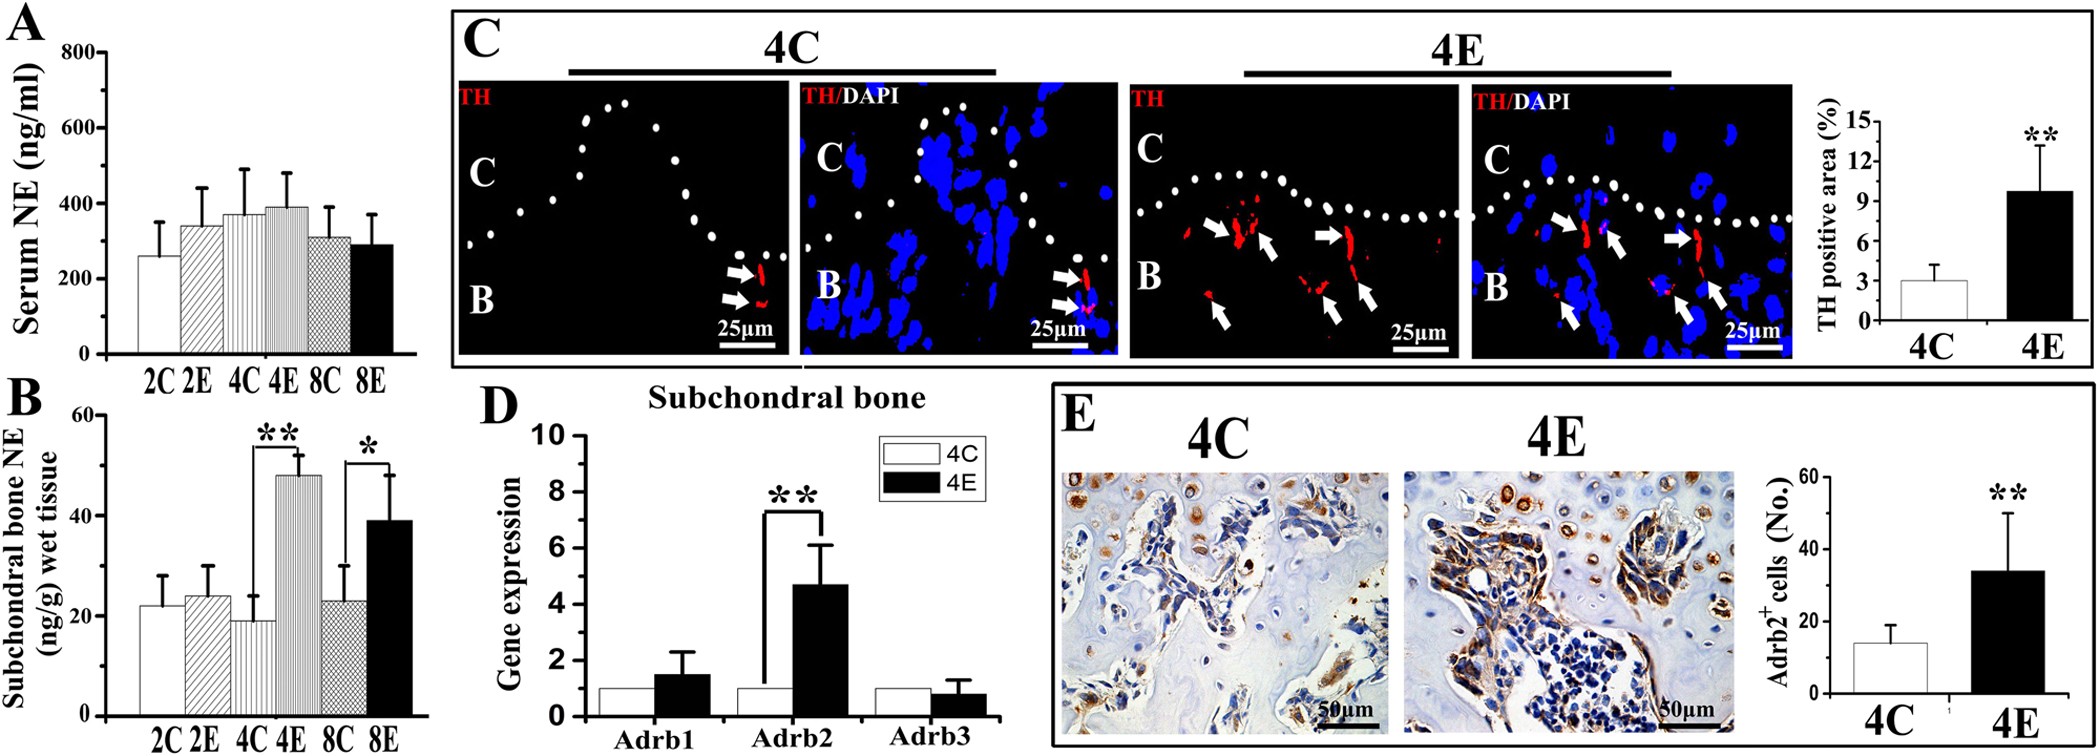 Sightseeing Hændelse gammelklog β2-adrenergic signal transduction plays a detrimental role in subchondral  bone loss of temporomandibular joint in osteoarthritis | Scientific Reports